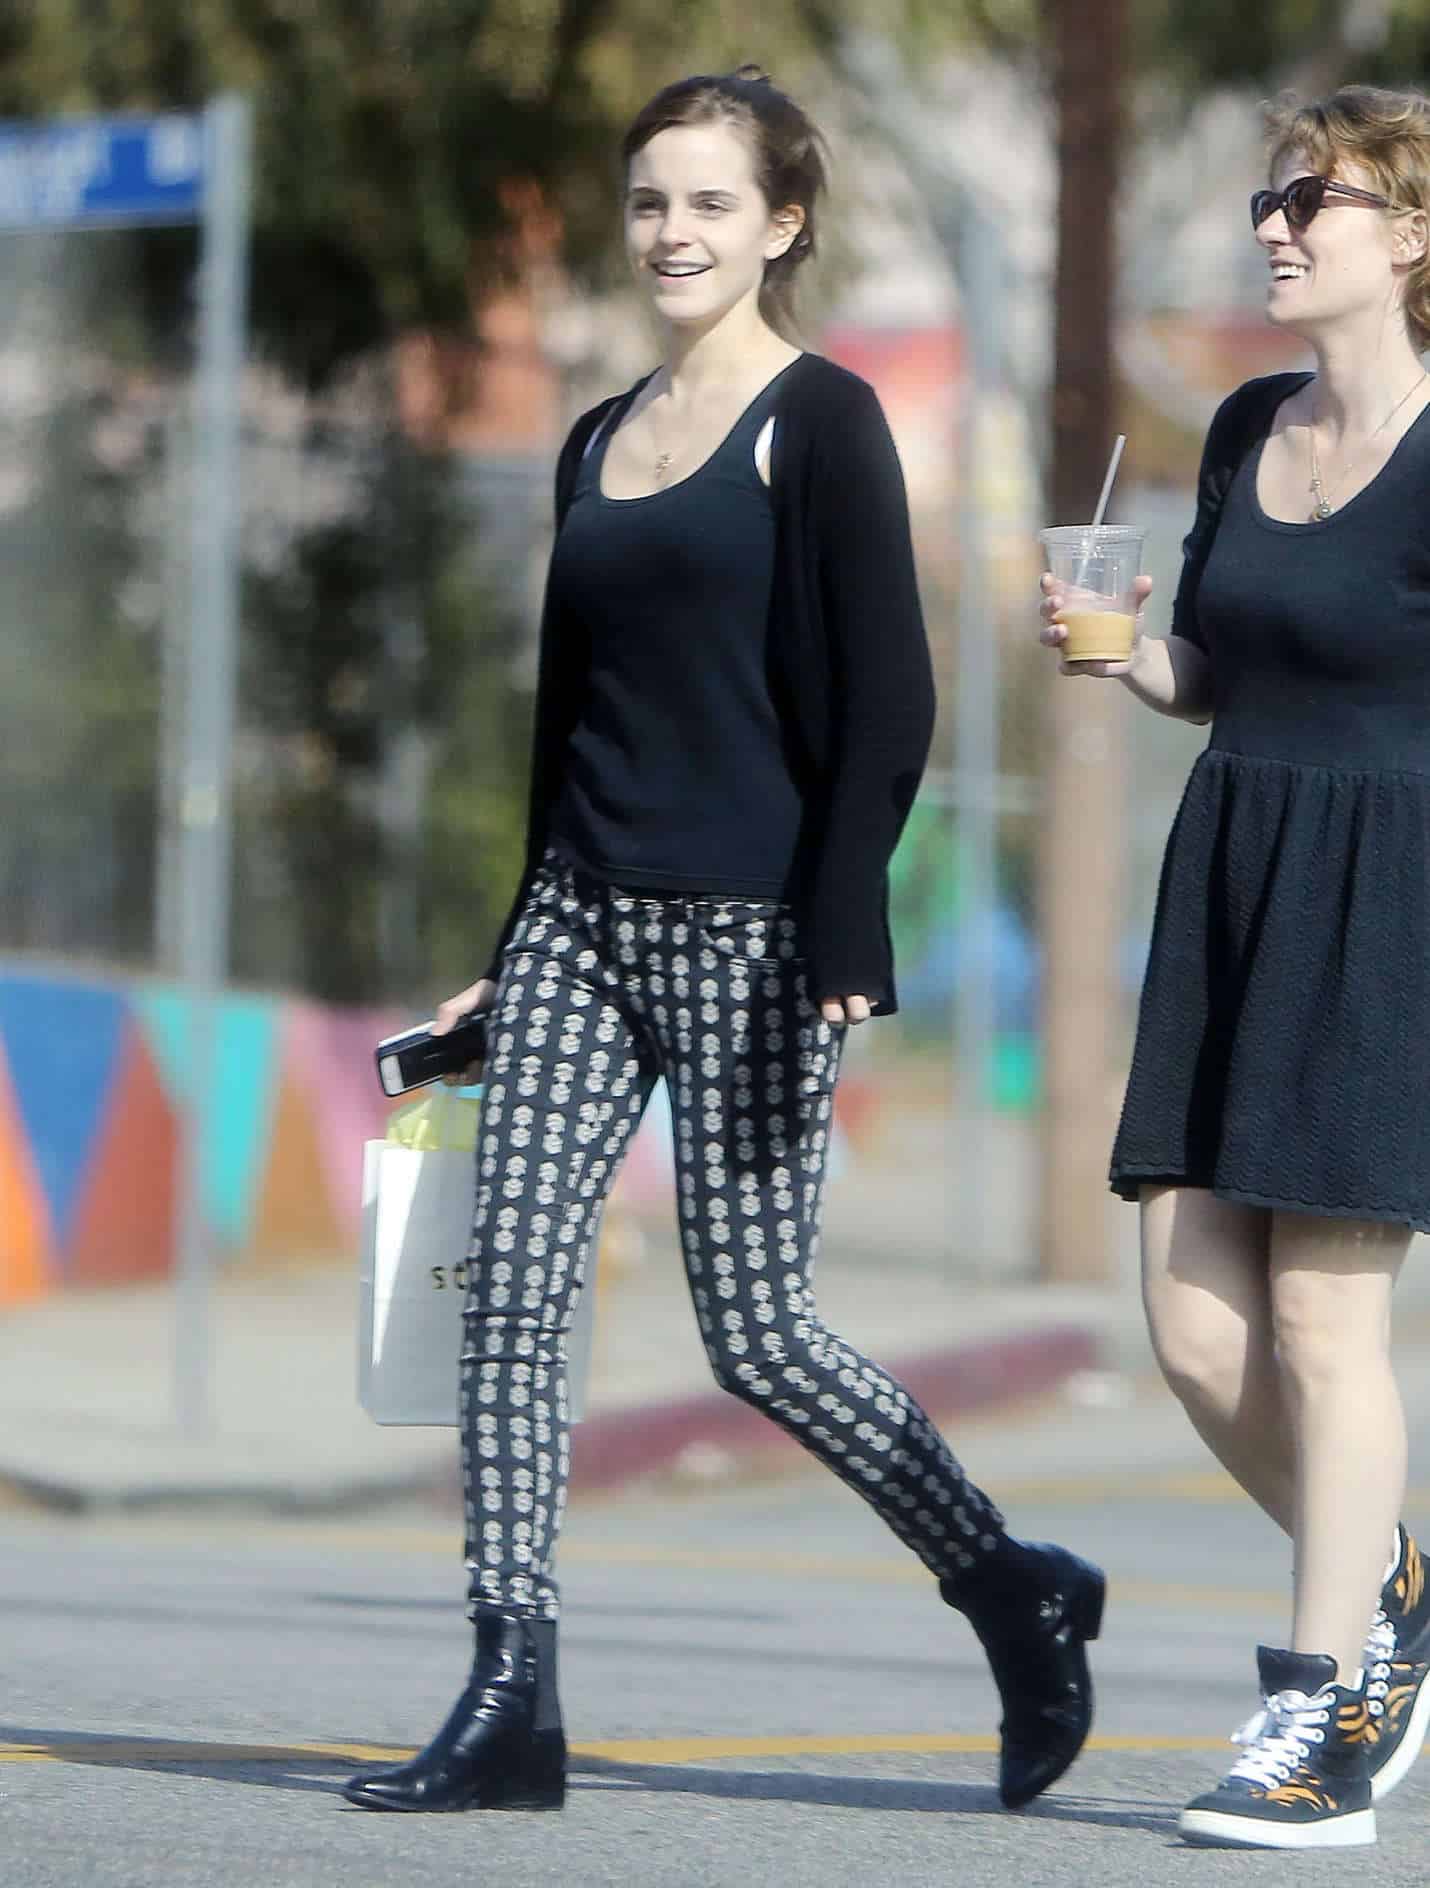 Emma Watson Has a Blast During Shopping Spree with her Friend in LA